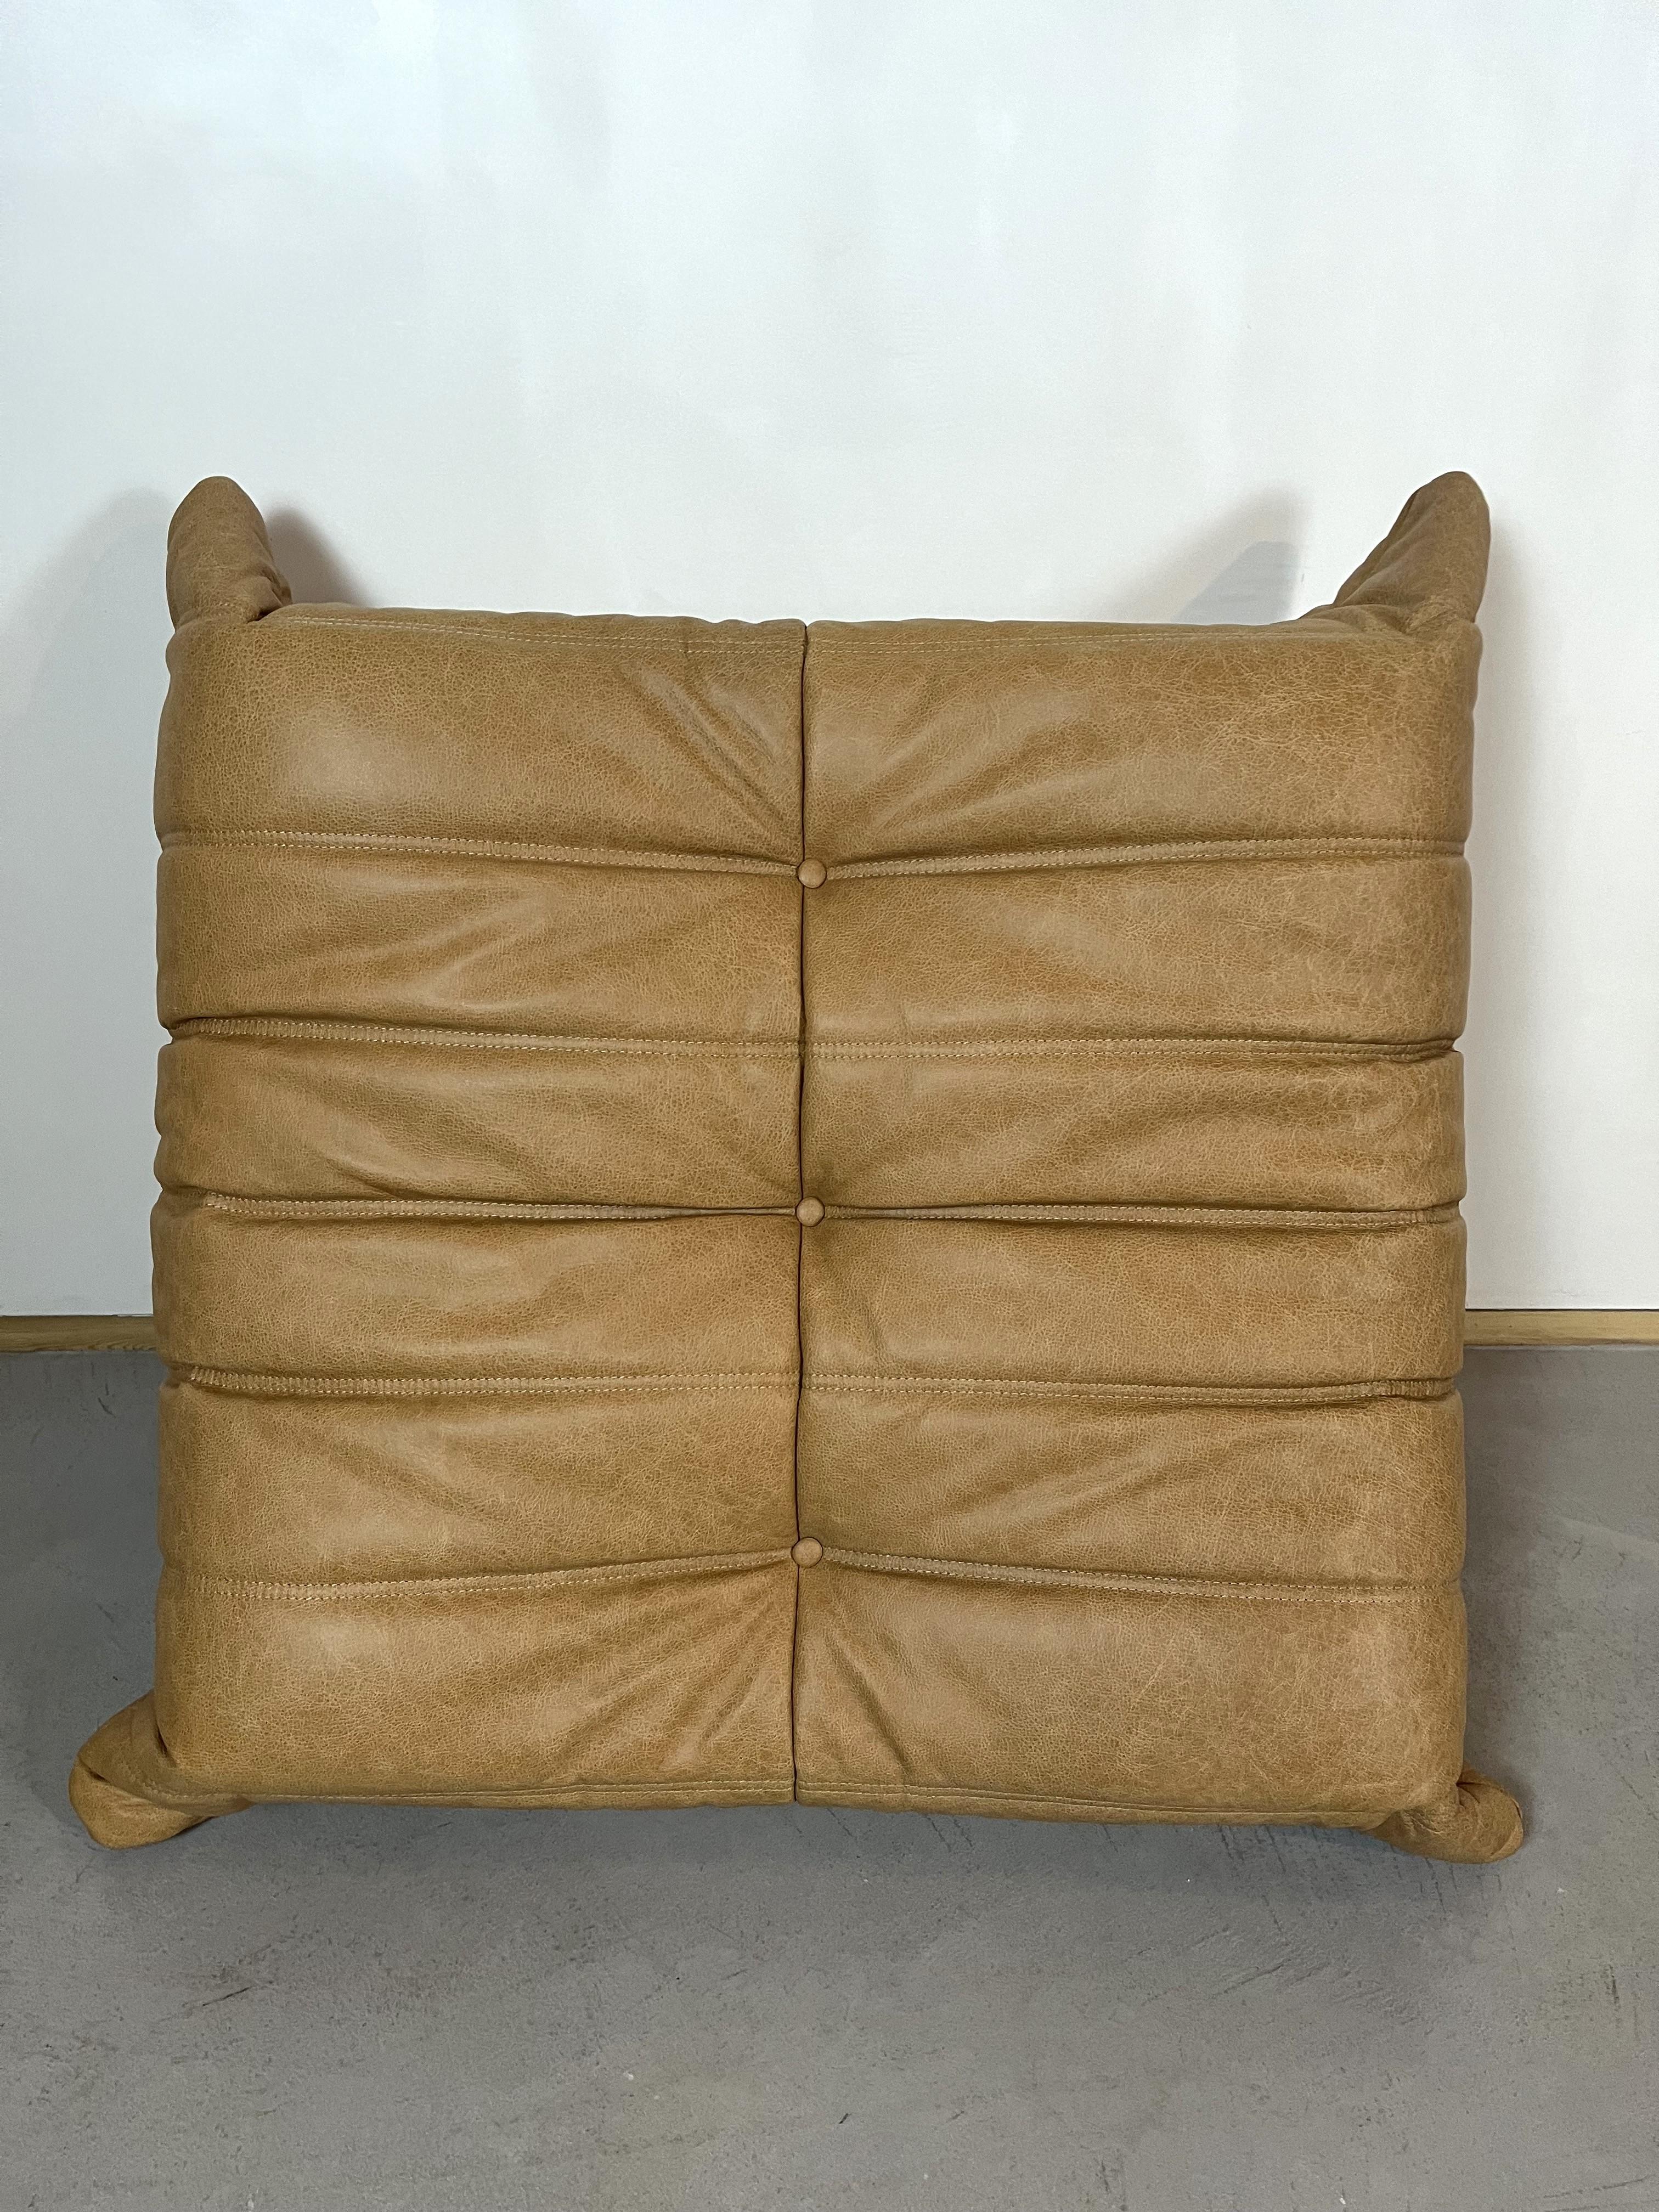 Camel leather Togo Sofa by Michel Ducaroy for Ligne Roset, Set of 5 pieces For Sale 5